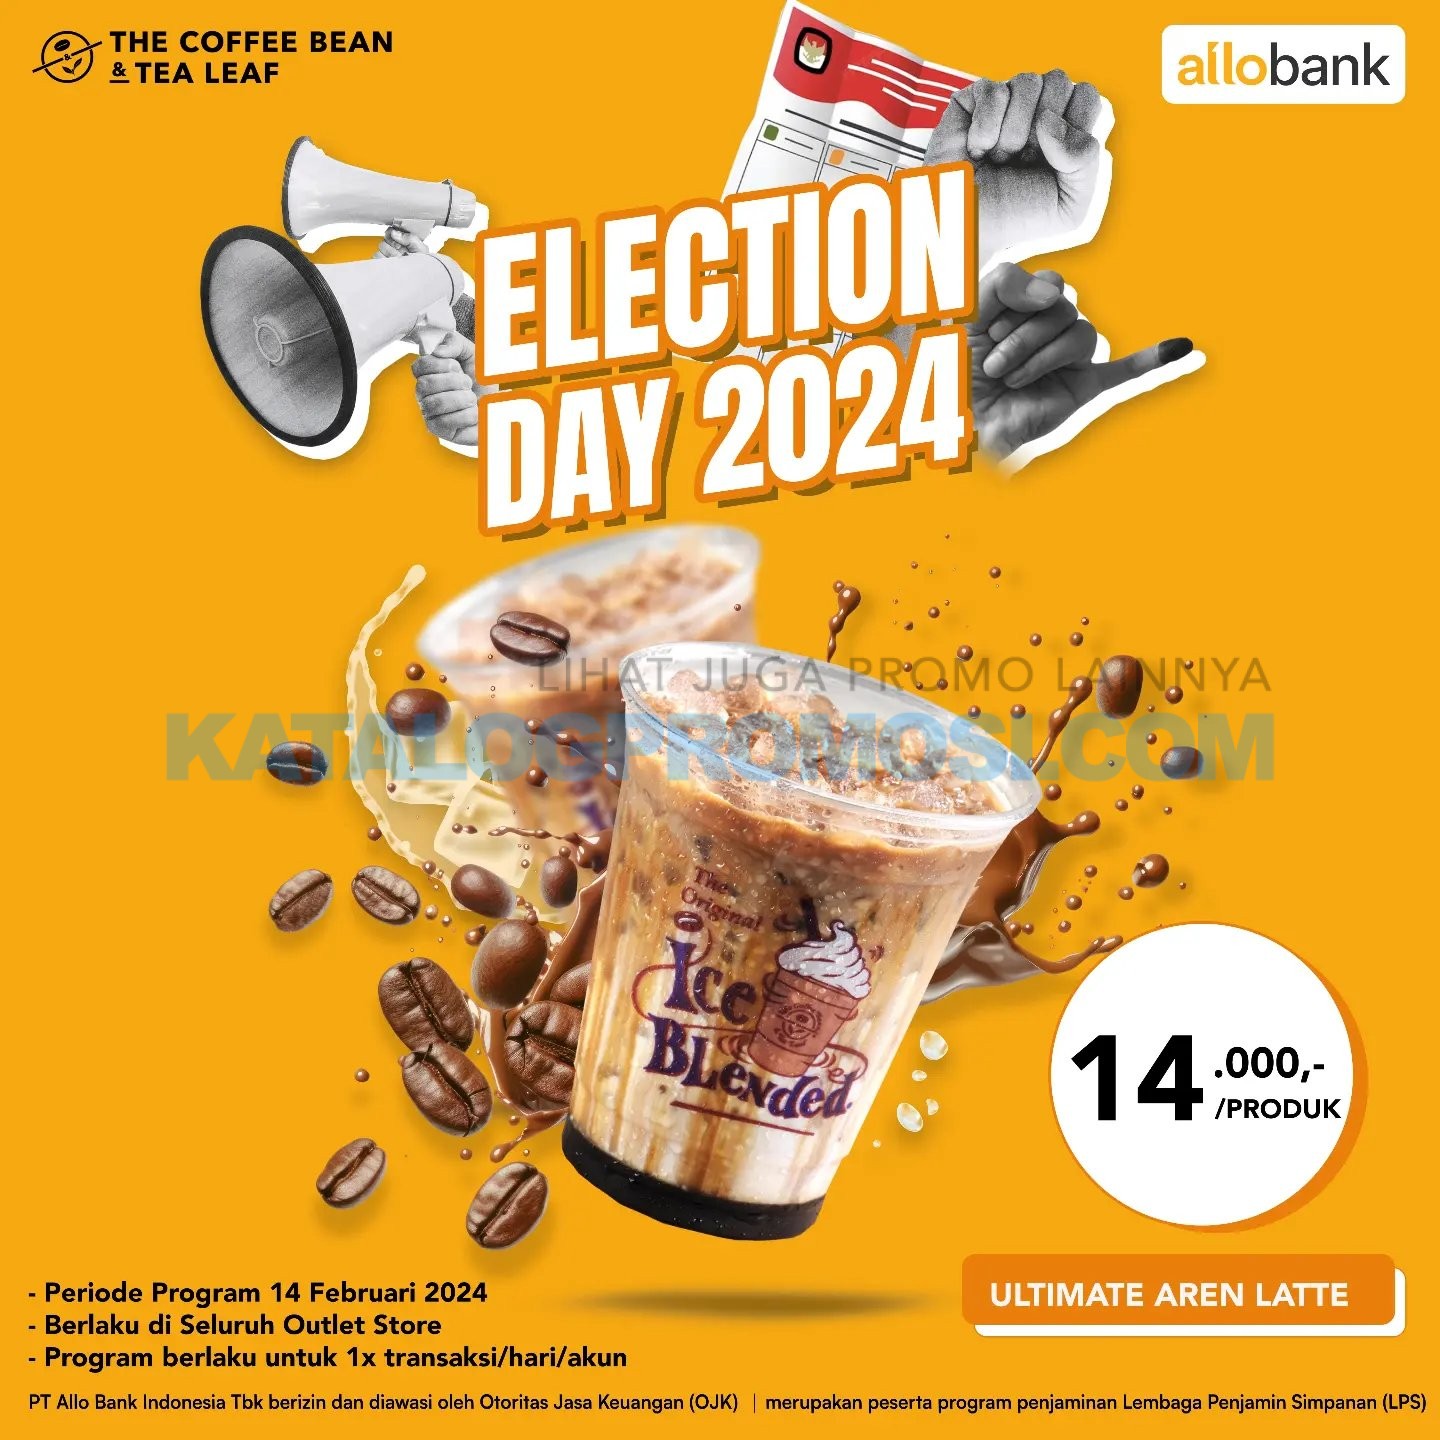 Promo PEMILU COFFEE BEAN ALLO BANK ELECTION DAY - Ultimate Aren Latte only 14.000